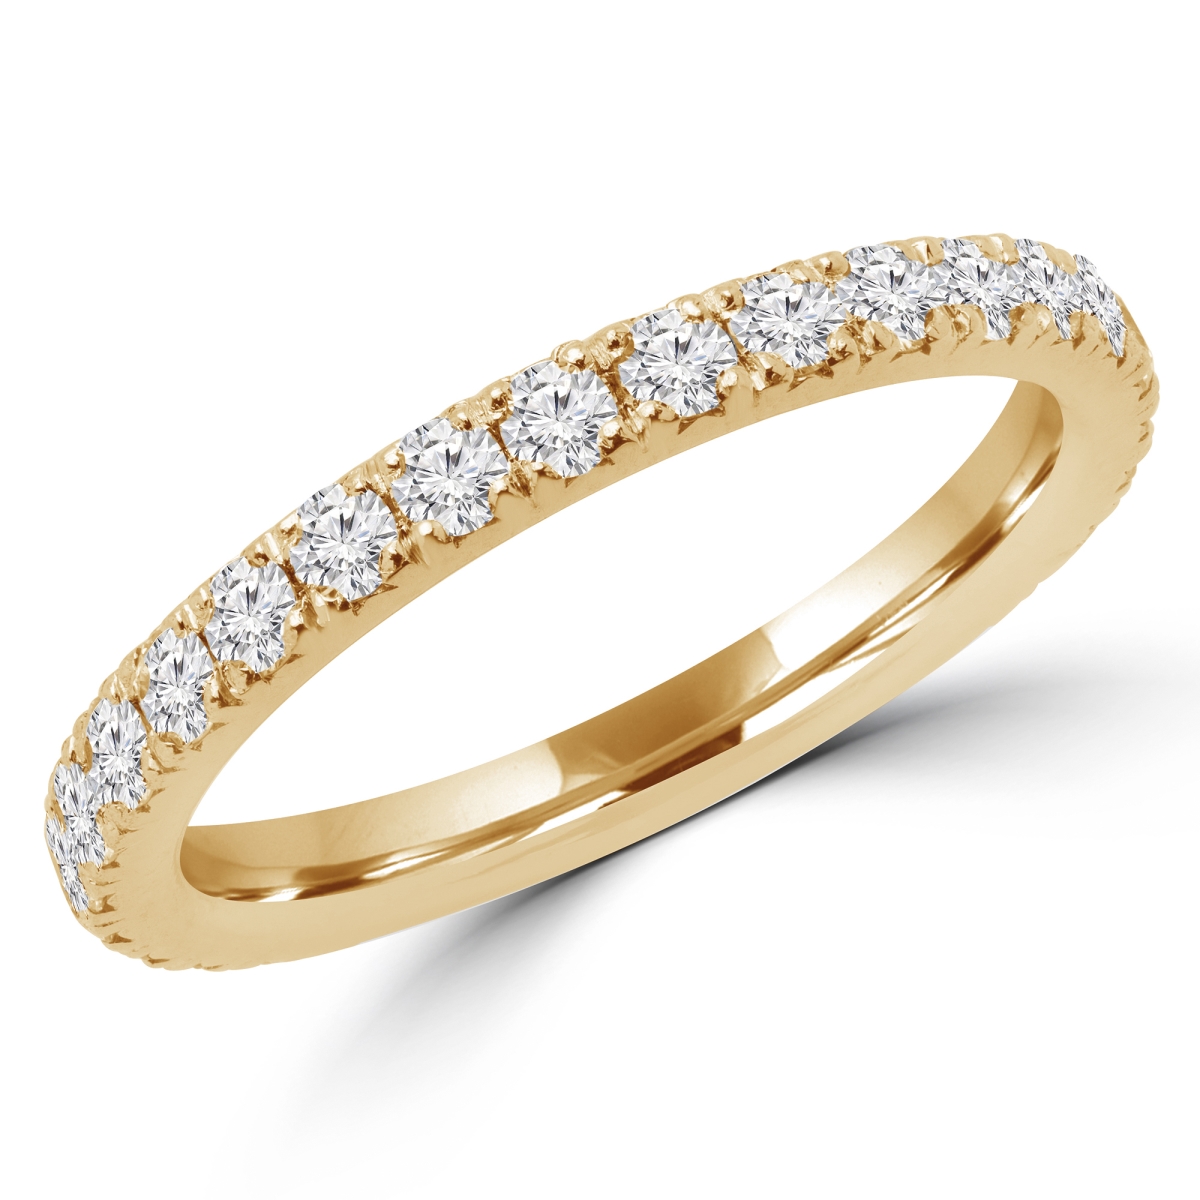 Picture of Majesty Diamonds MD180192-3.5 0.6 CTW Round Diamond Semi-Eternity Wedding Band Ring in 14K Yellow Gold - Size 3.5